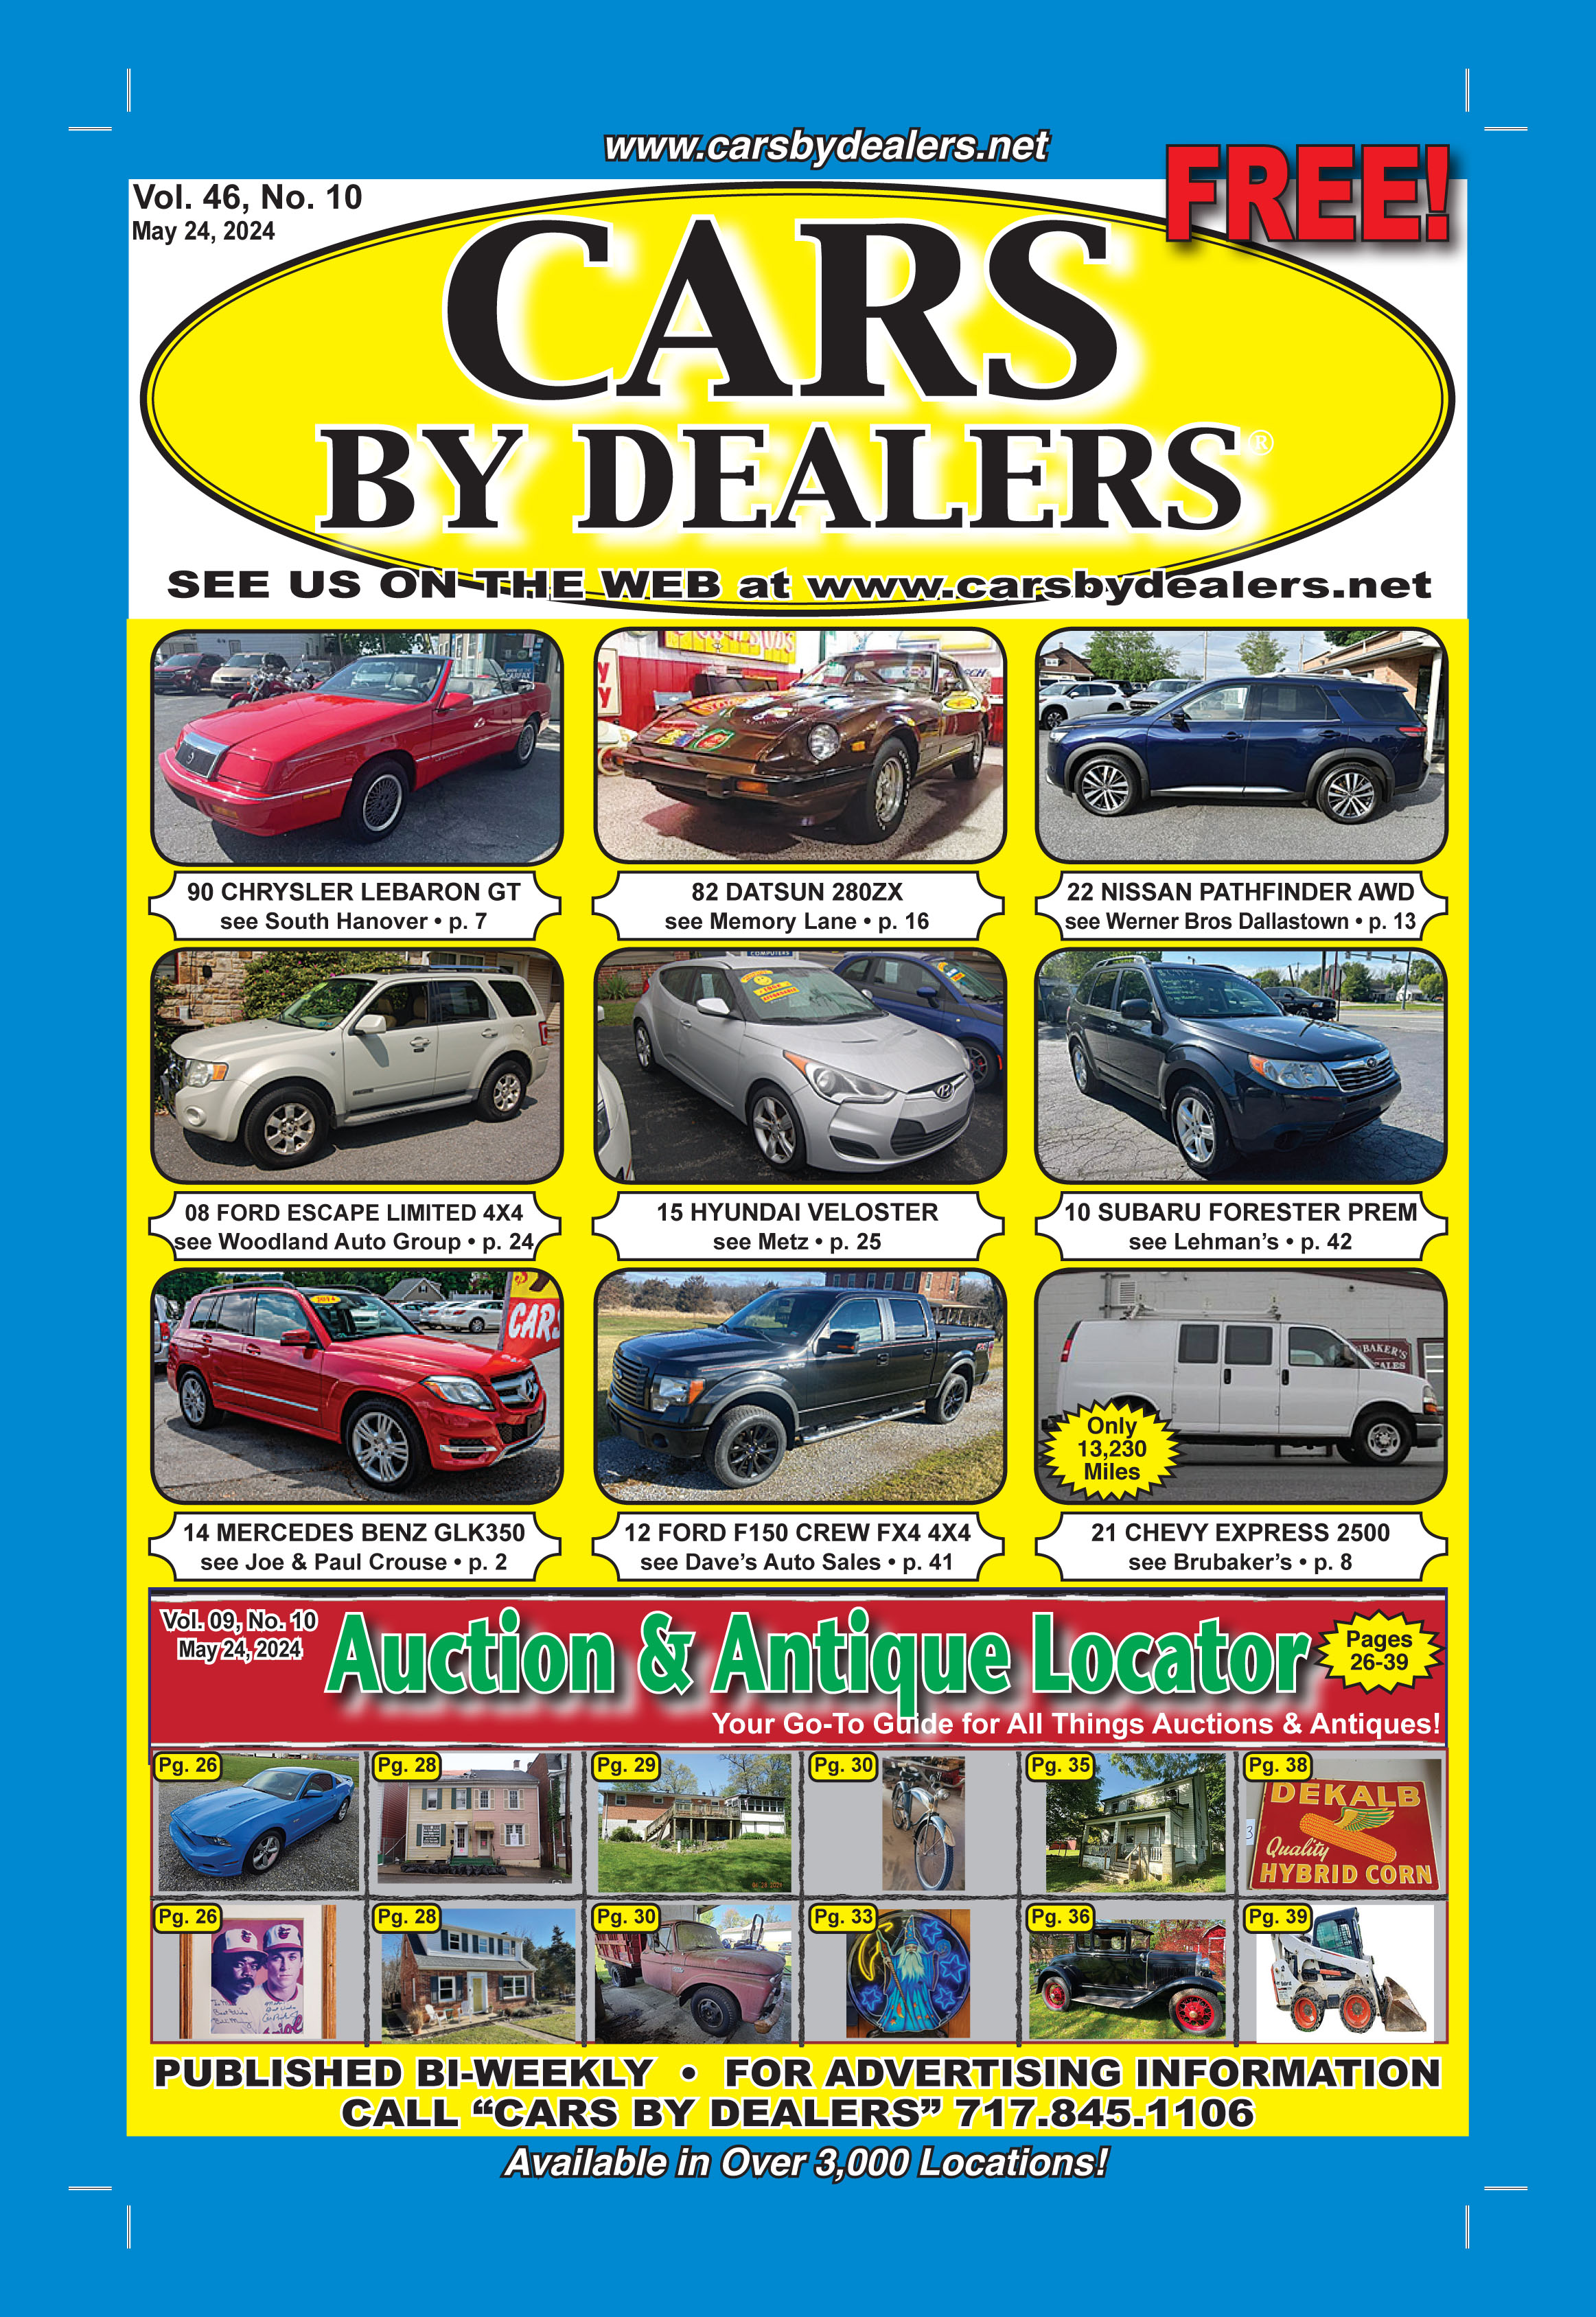 PDF of Cars By Dealers